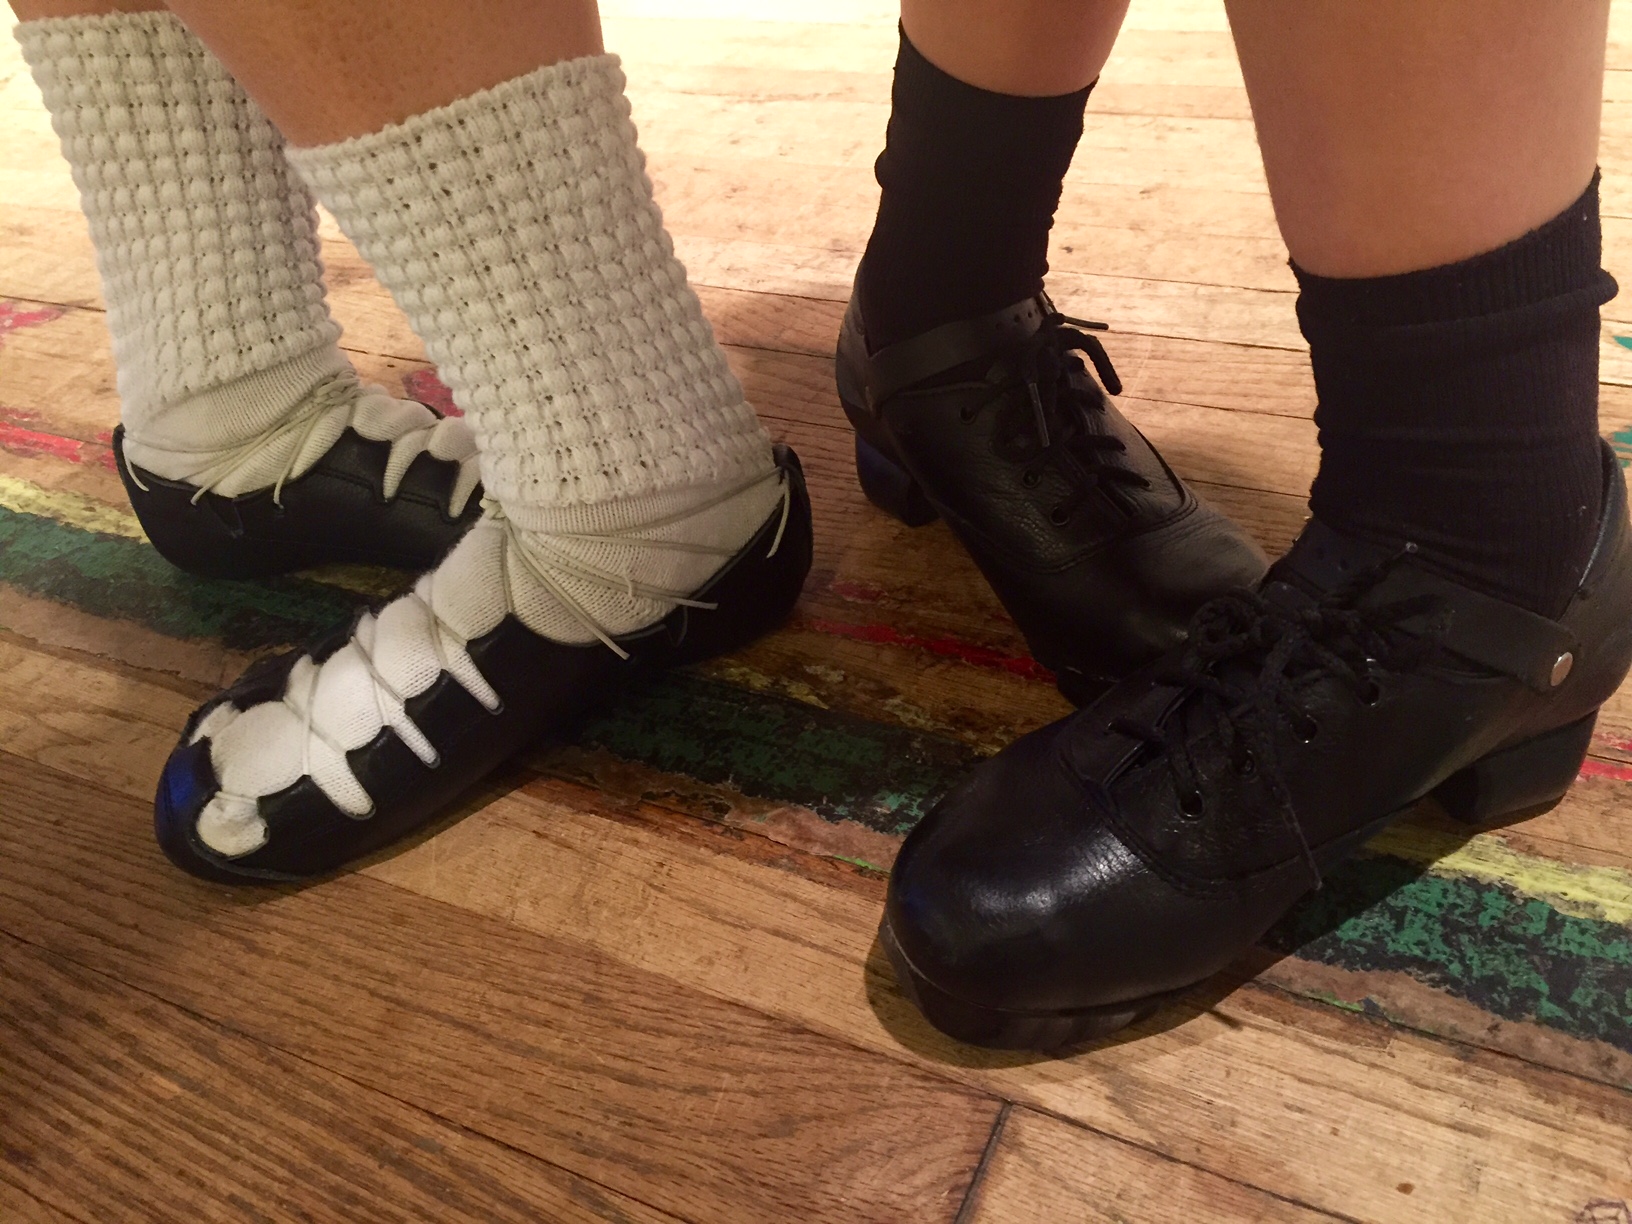 Both dancers have a hard and soft shoe performance planned for competition. (WTOP/Megan Cloherty)